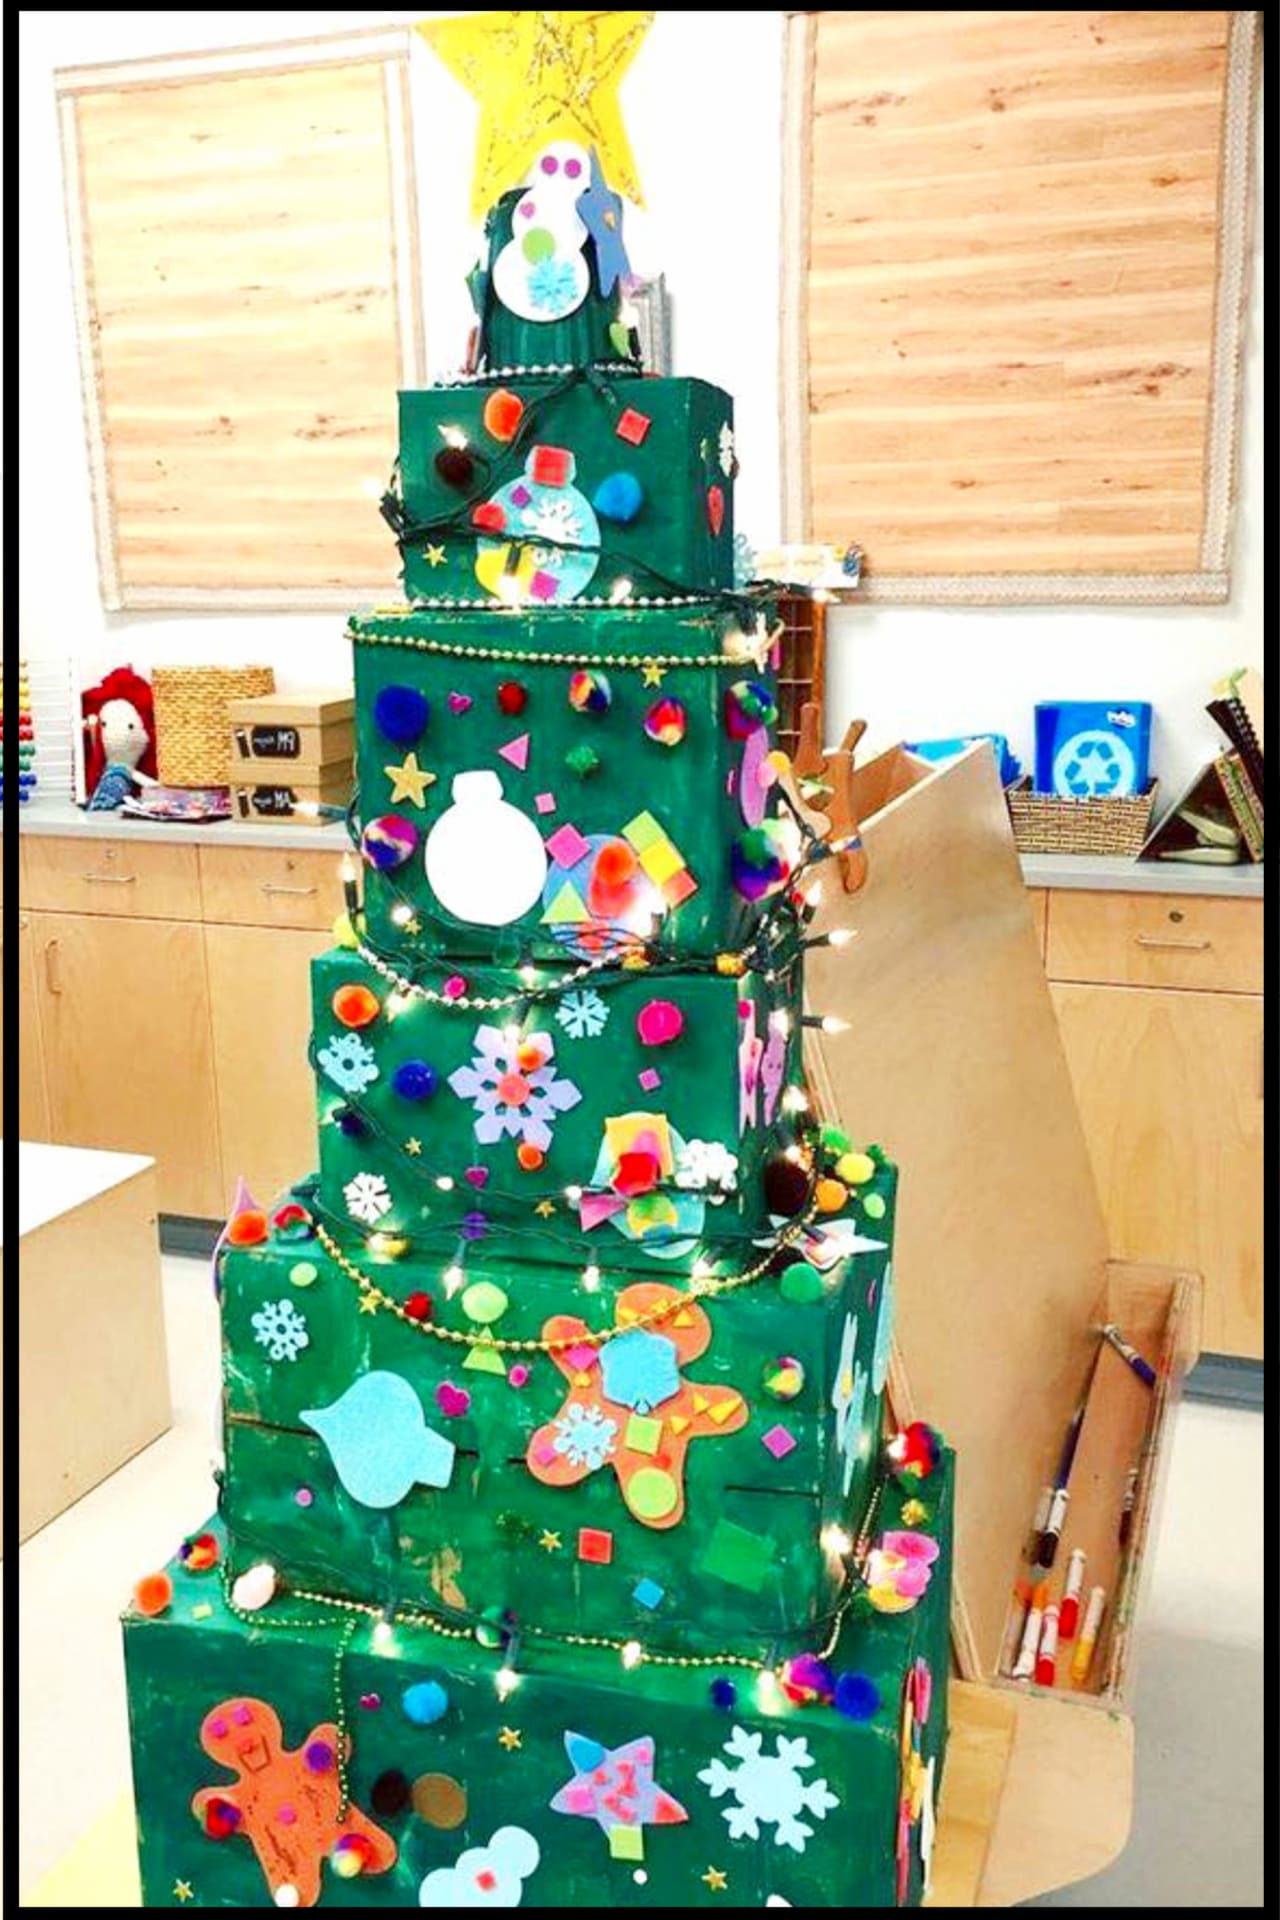 Classroom Christmas Crafts for Kids - LOVE this Christmas tree craft project for the kids in Prek, Kindergarten, Daycare etc - stack boxes in a Christmas tree shape, paint, and let the kids decorate with their Christmas paper crafts